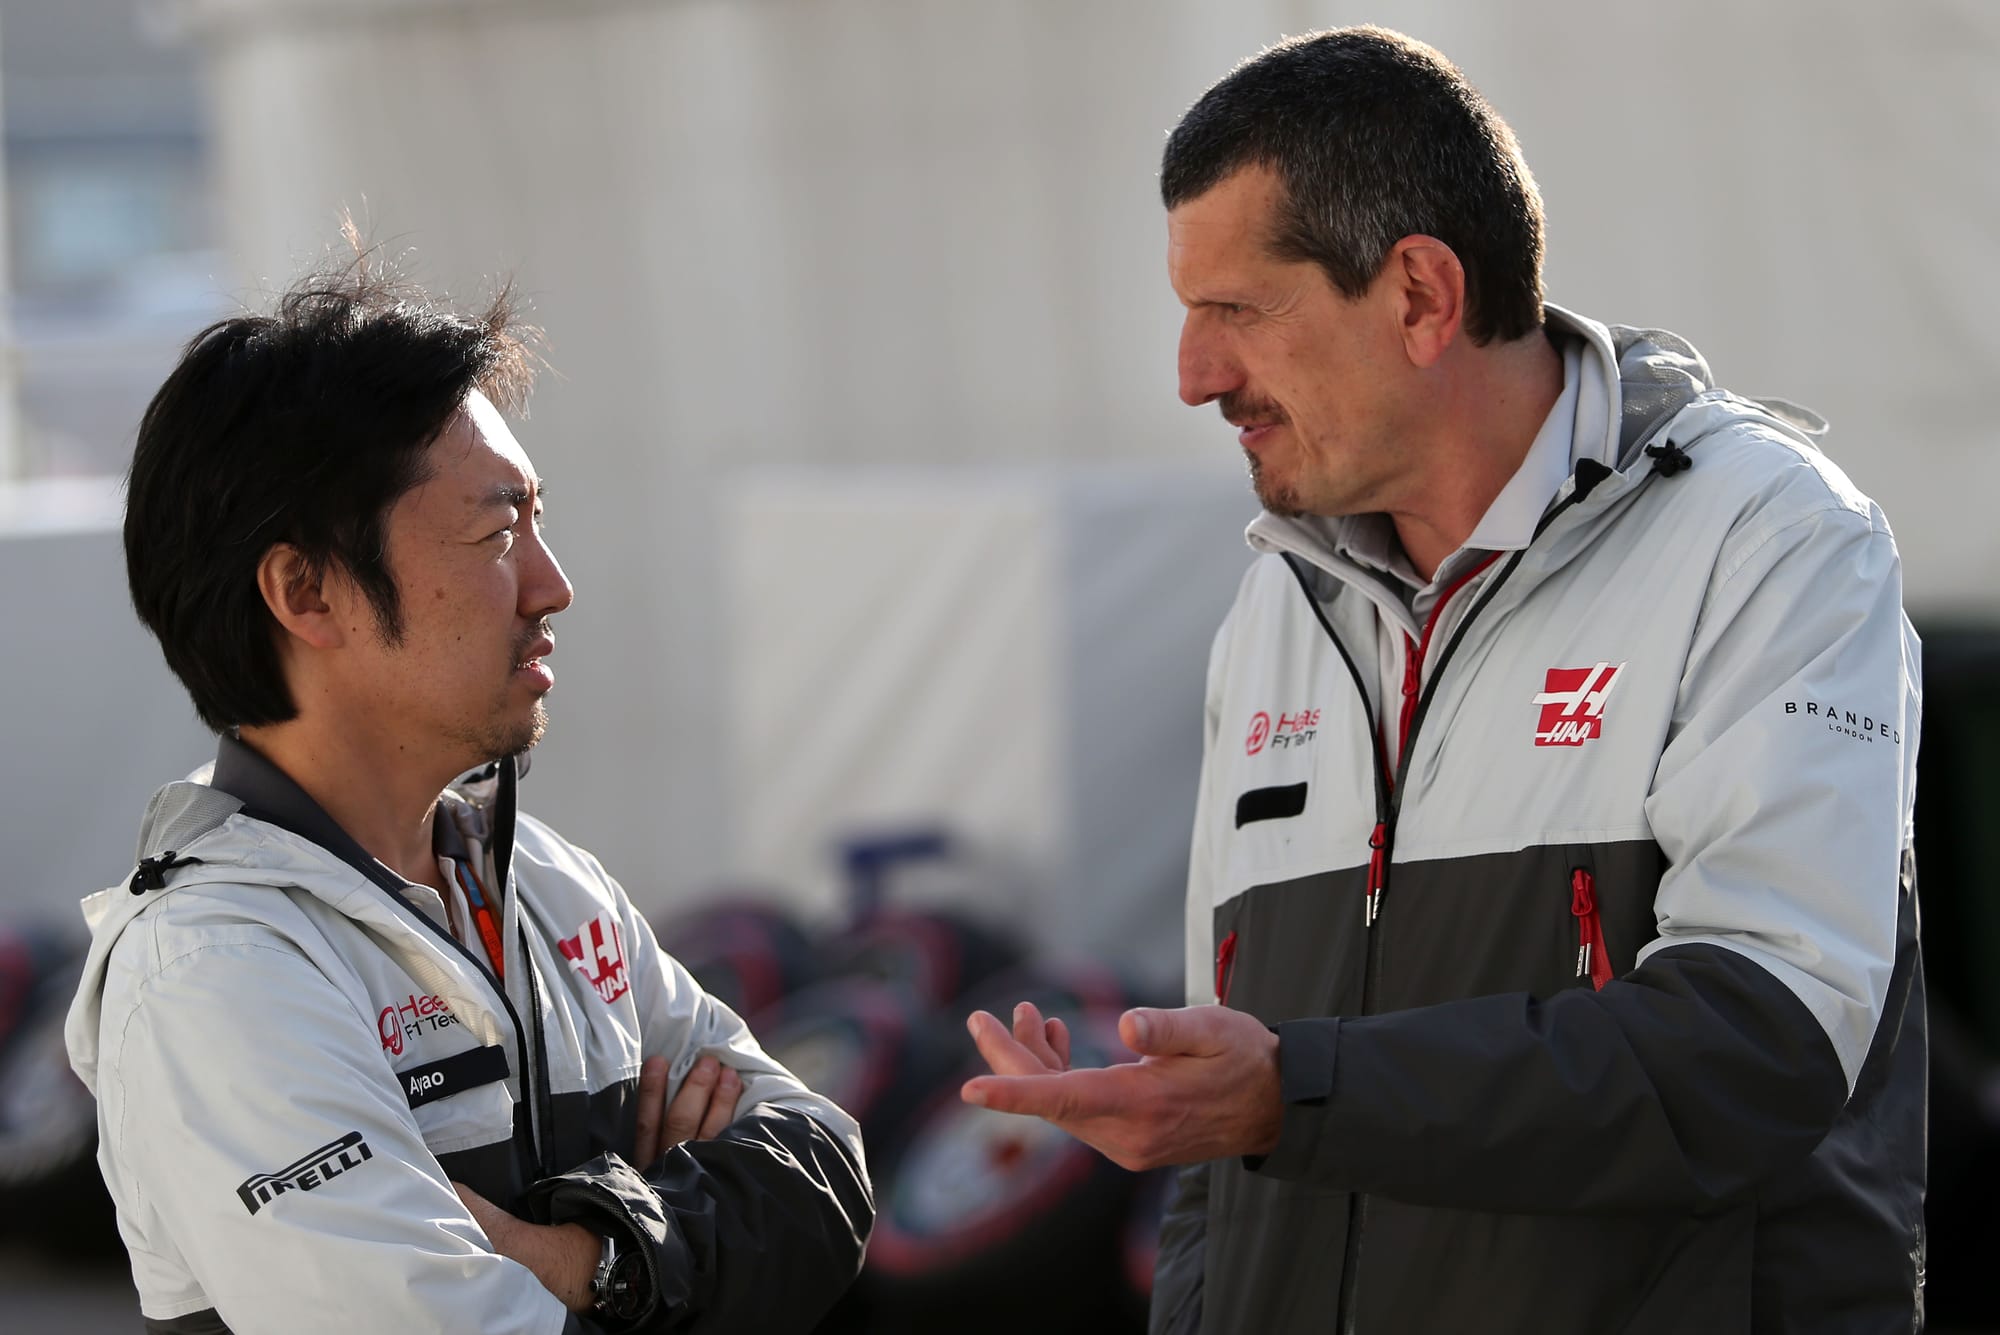 Ayao Komatsu and Guenther Steiner, Haas, F1